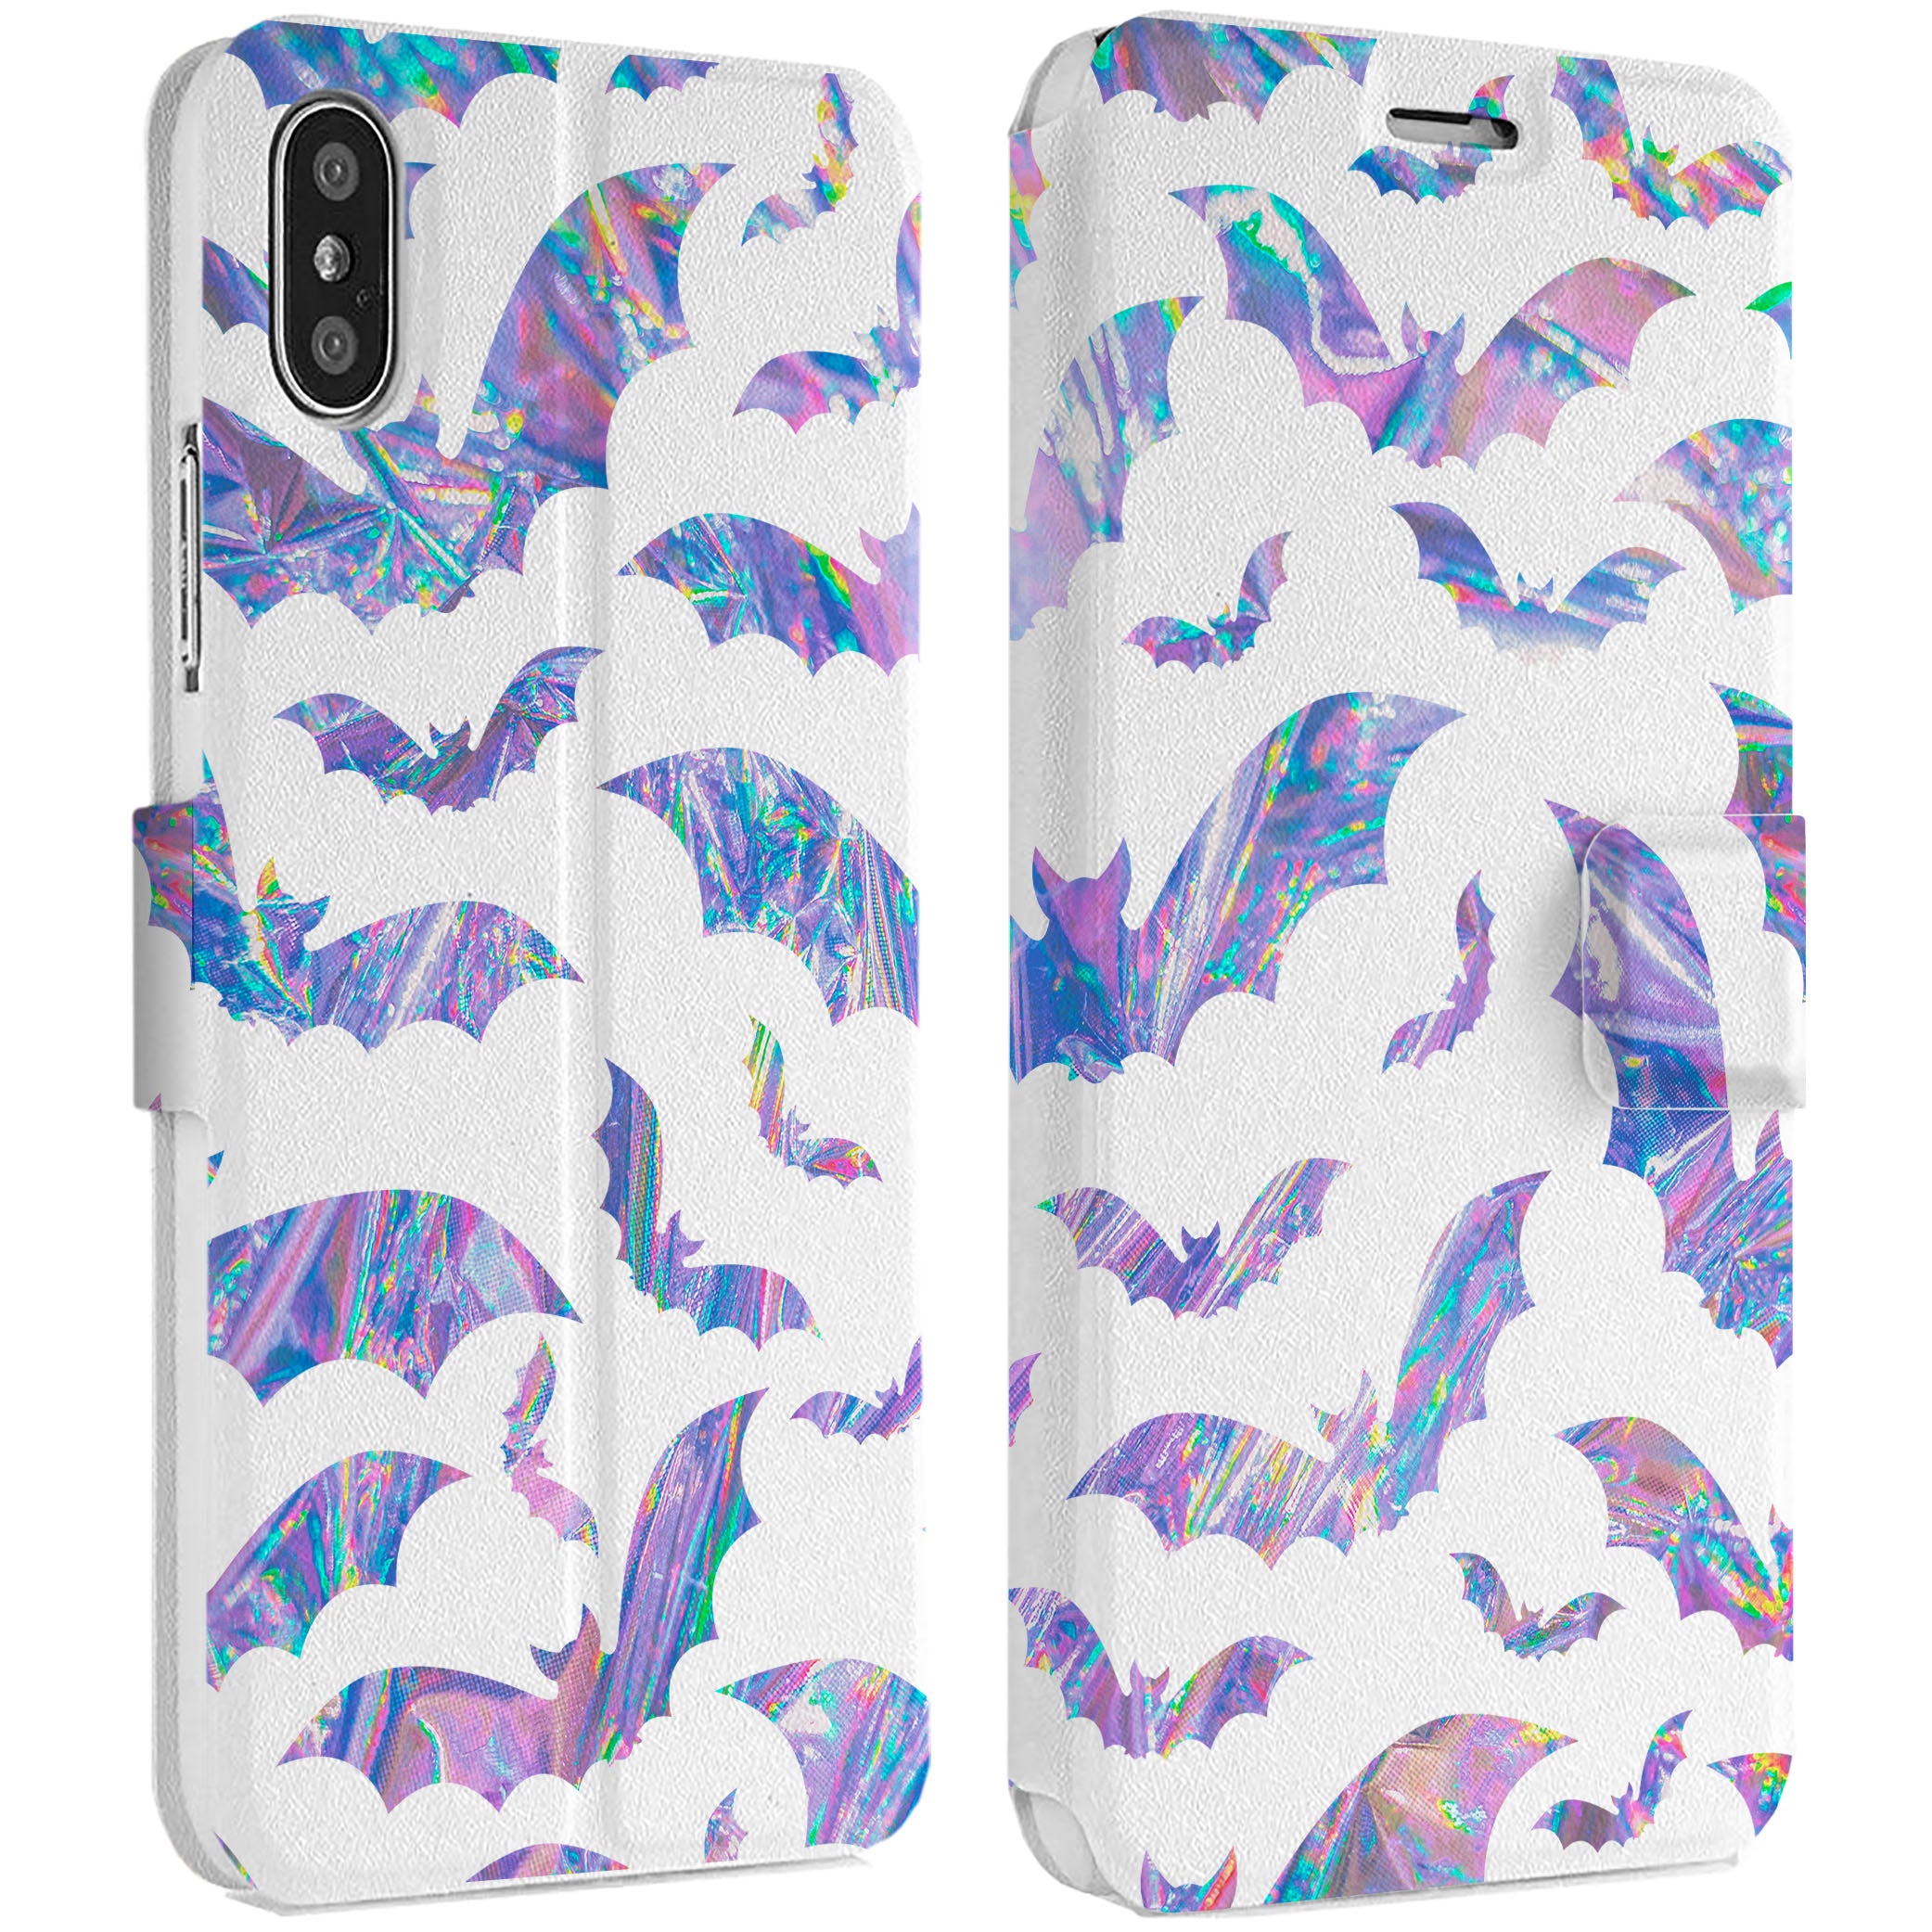 Lex Altern Iridescent Bat iPhone Wallet Case for your Apple phone.